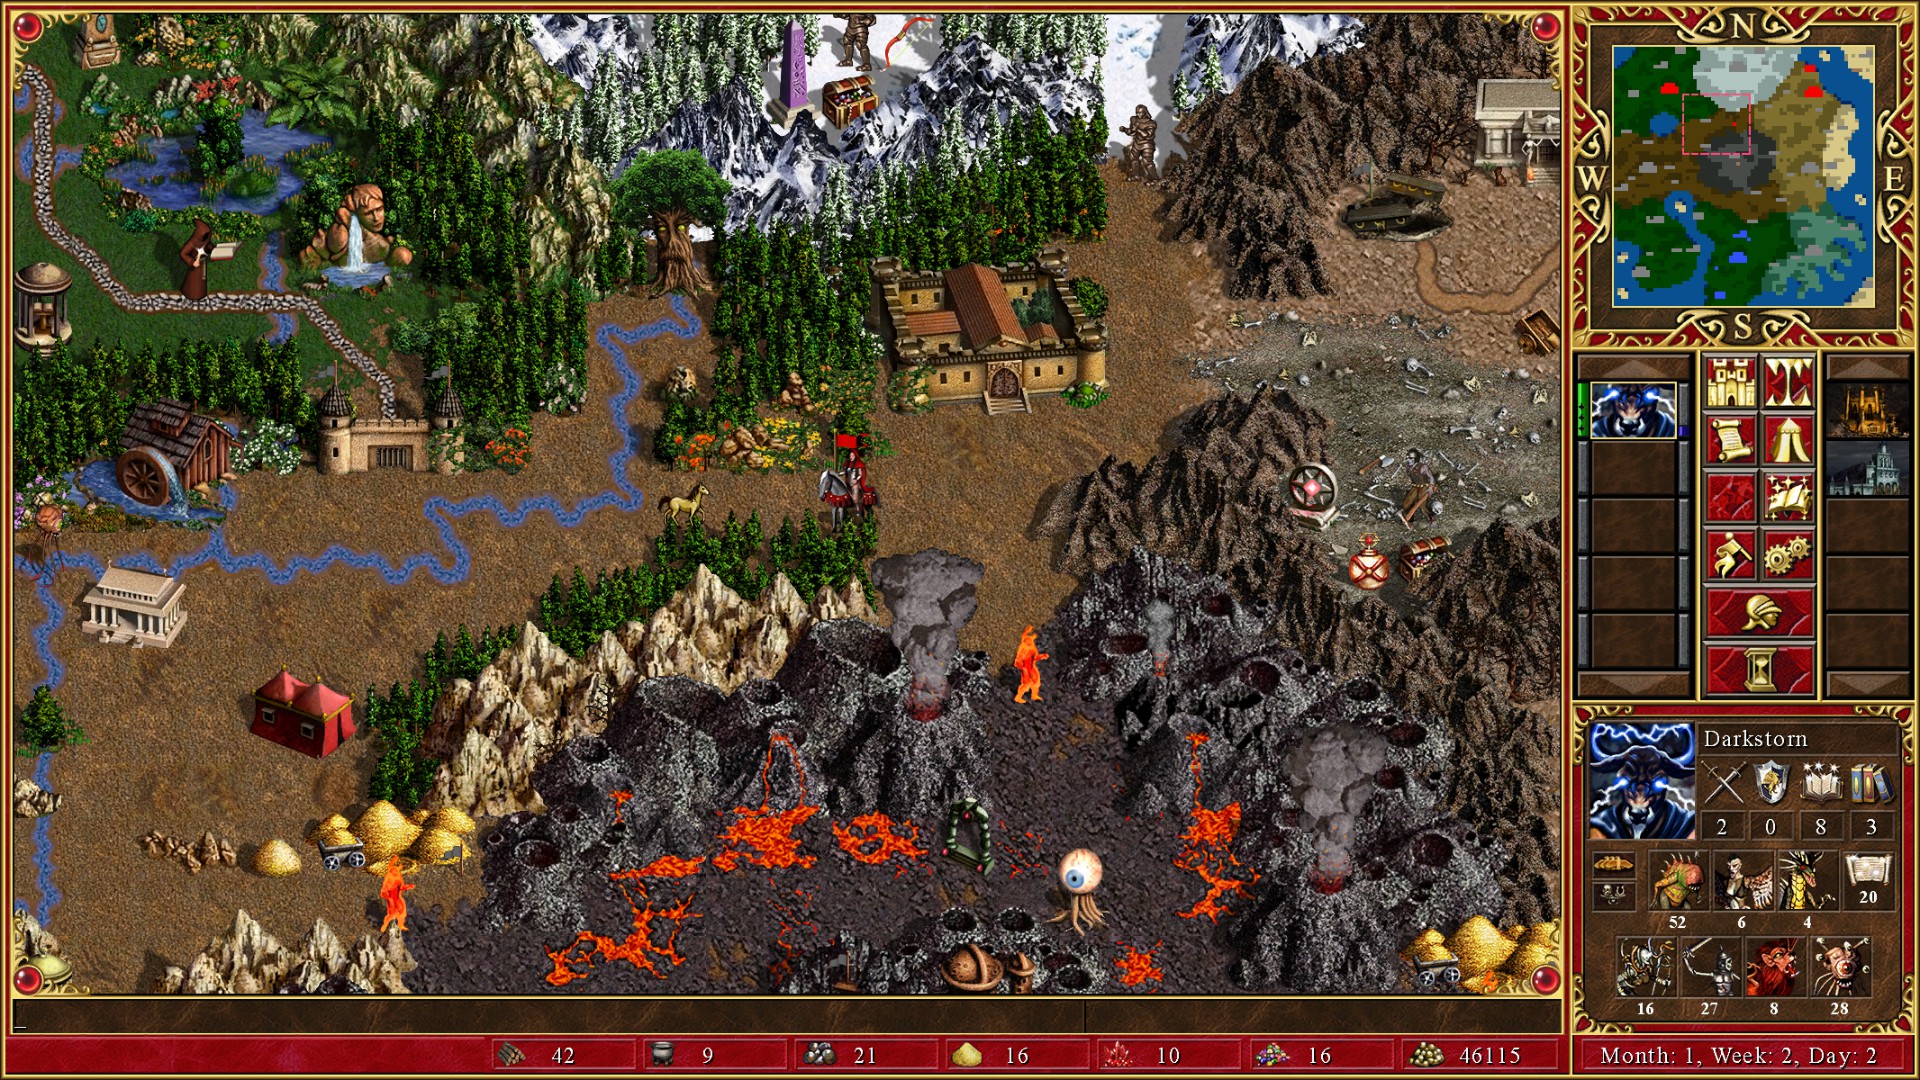 free download heroes might and magic 3